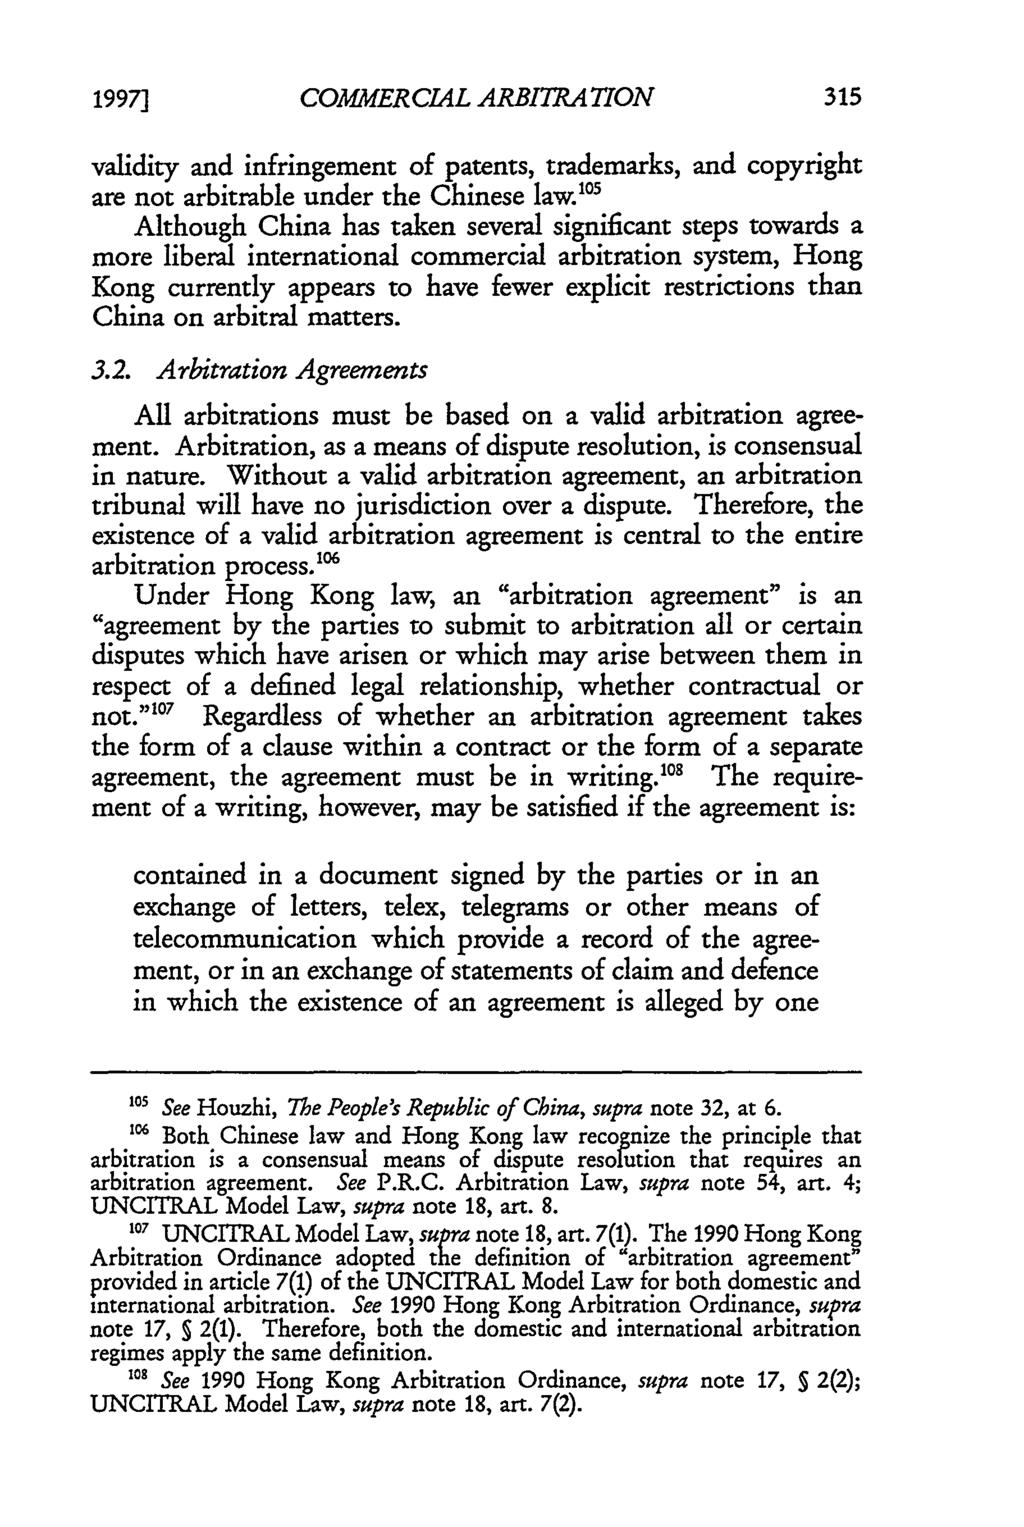 1997] Fishburne and Lian: Commercial Arbitration in Hong Kong and China: A Comparative Anal COMMERCIAL ARBITRATION validity and infringement of patents, trademarks, and copyright are not arbitrable